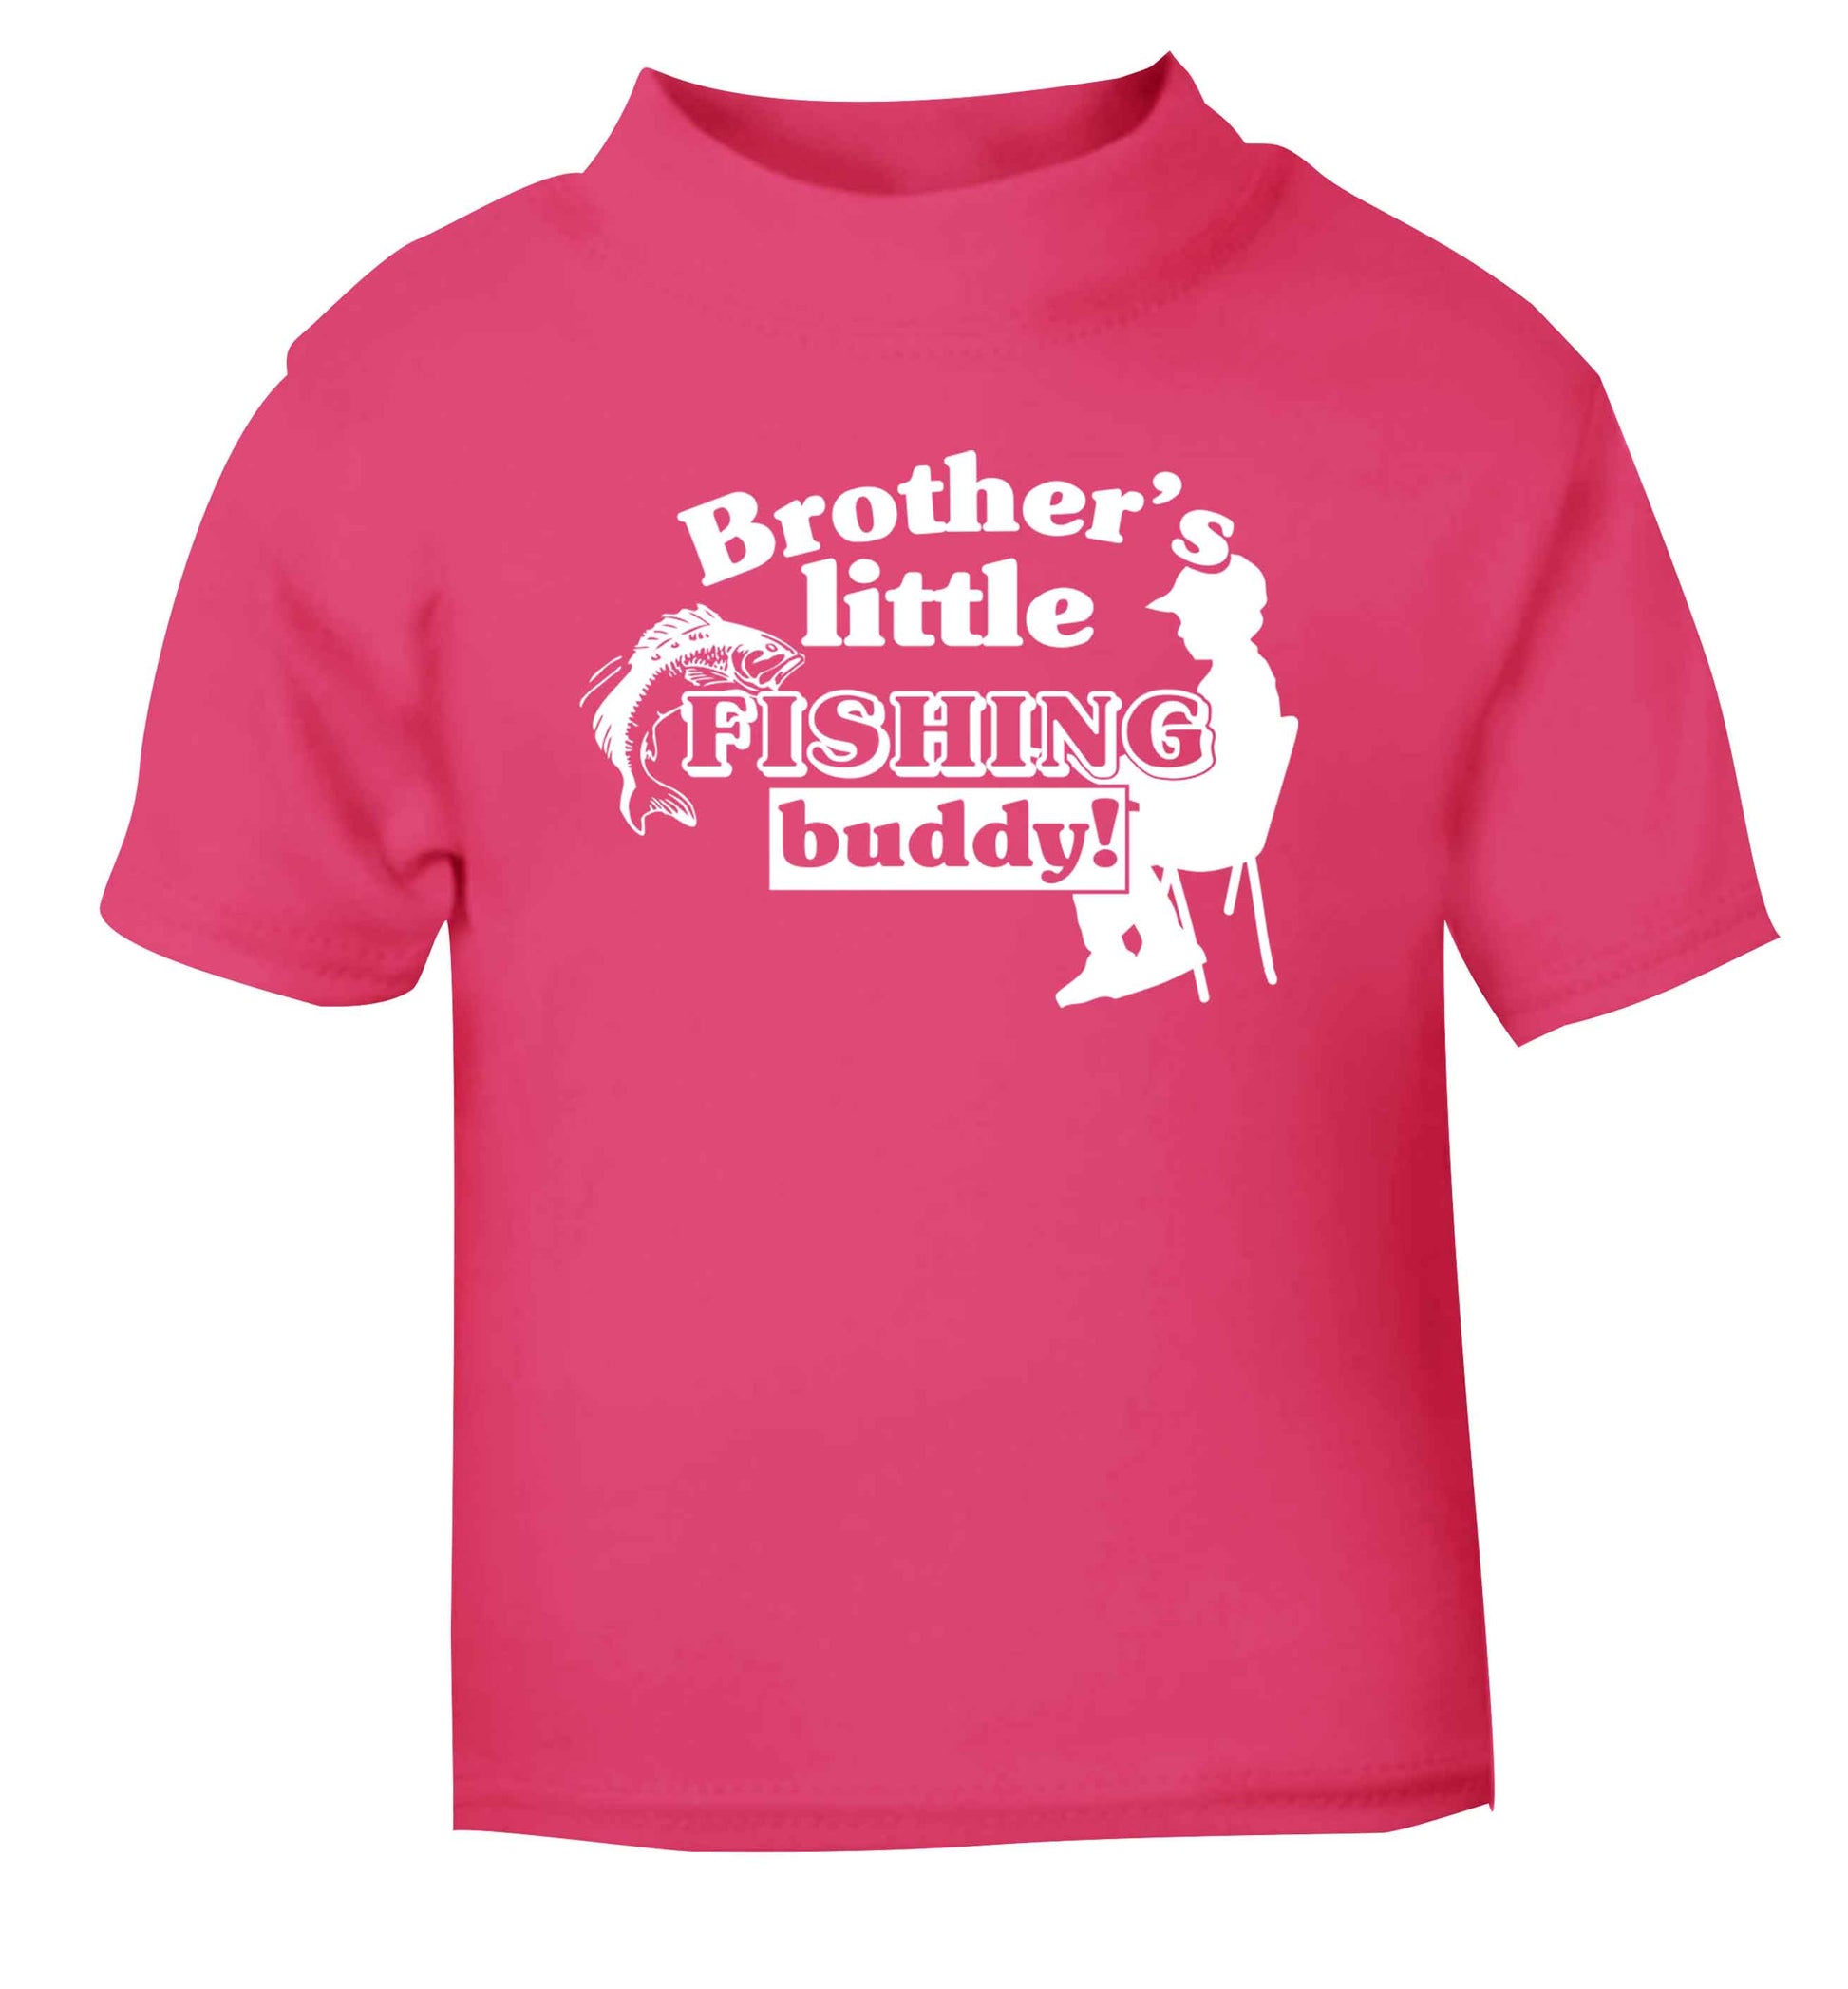 Brother's little fishing buddy pink Baby Toddler Tshirt 2 Years